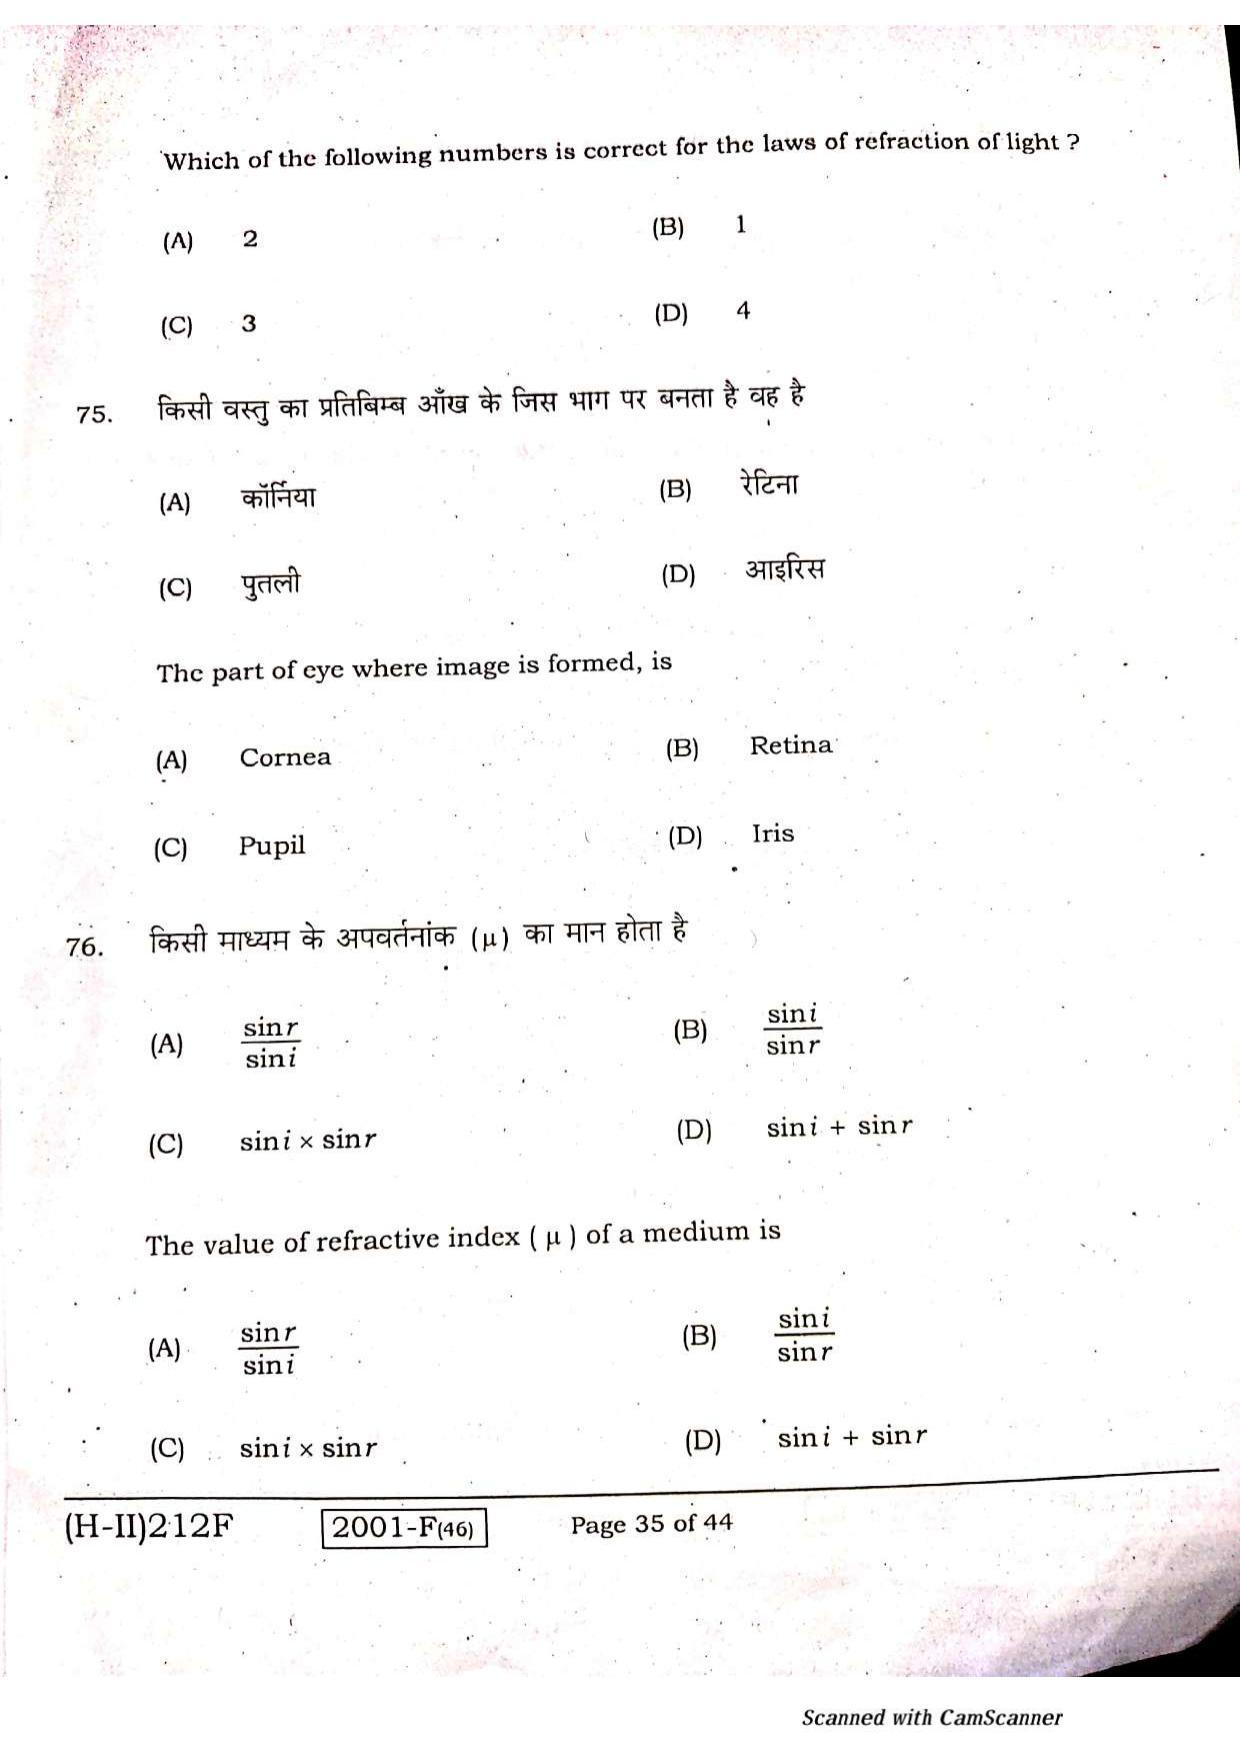 Bihar Board Class 10 Science 2021 (2nd Sitting) Question Paper - Page 33